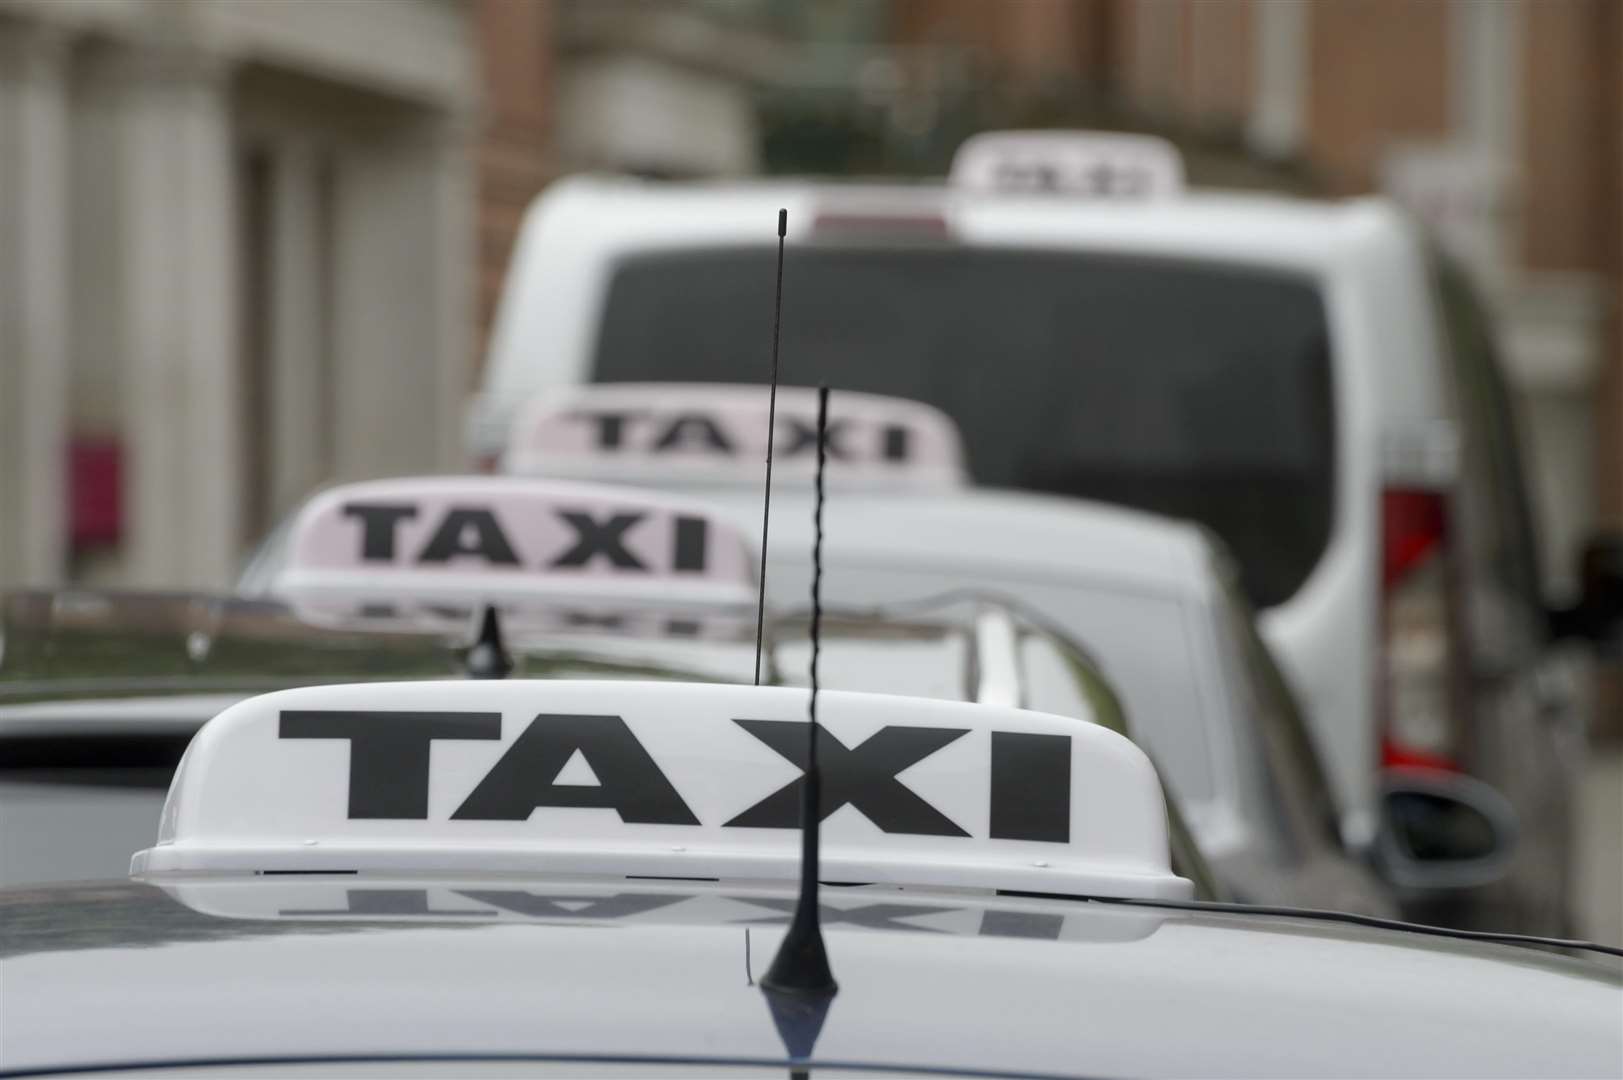 A taxi driver was the victim of an attempted robbery